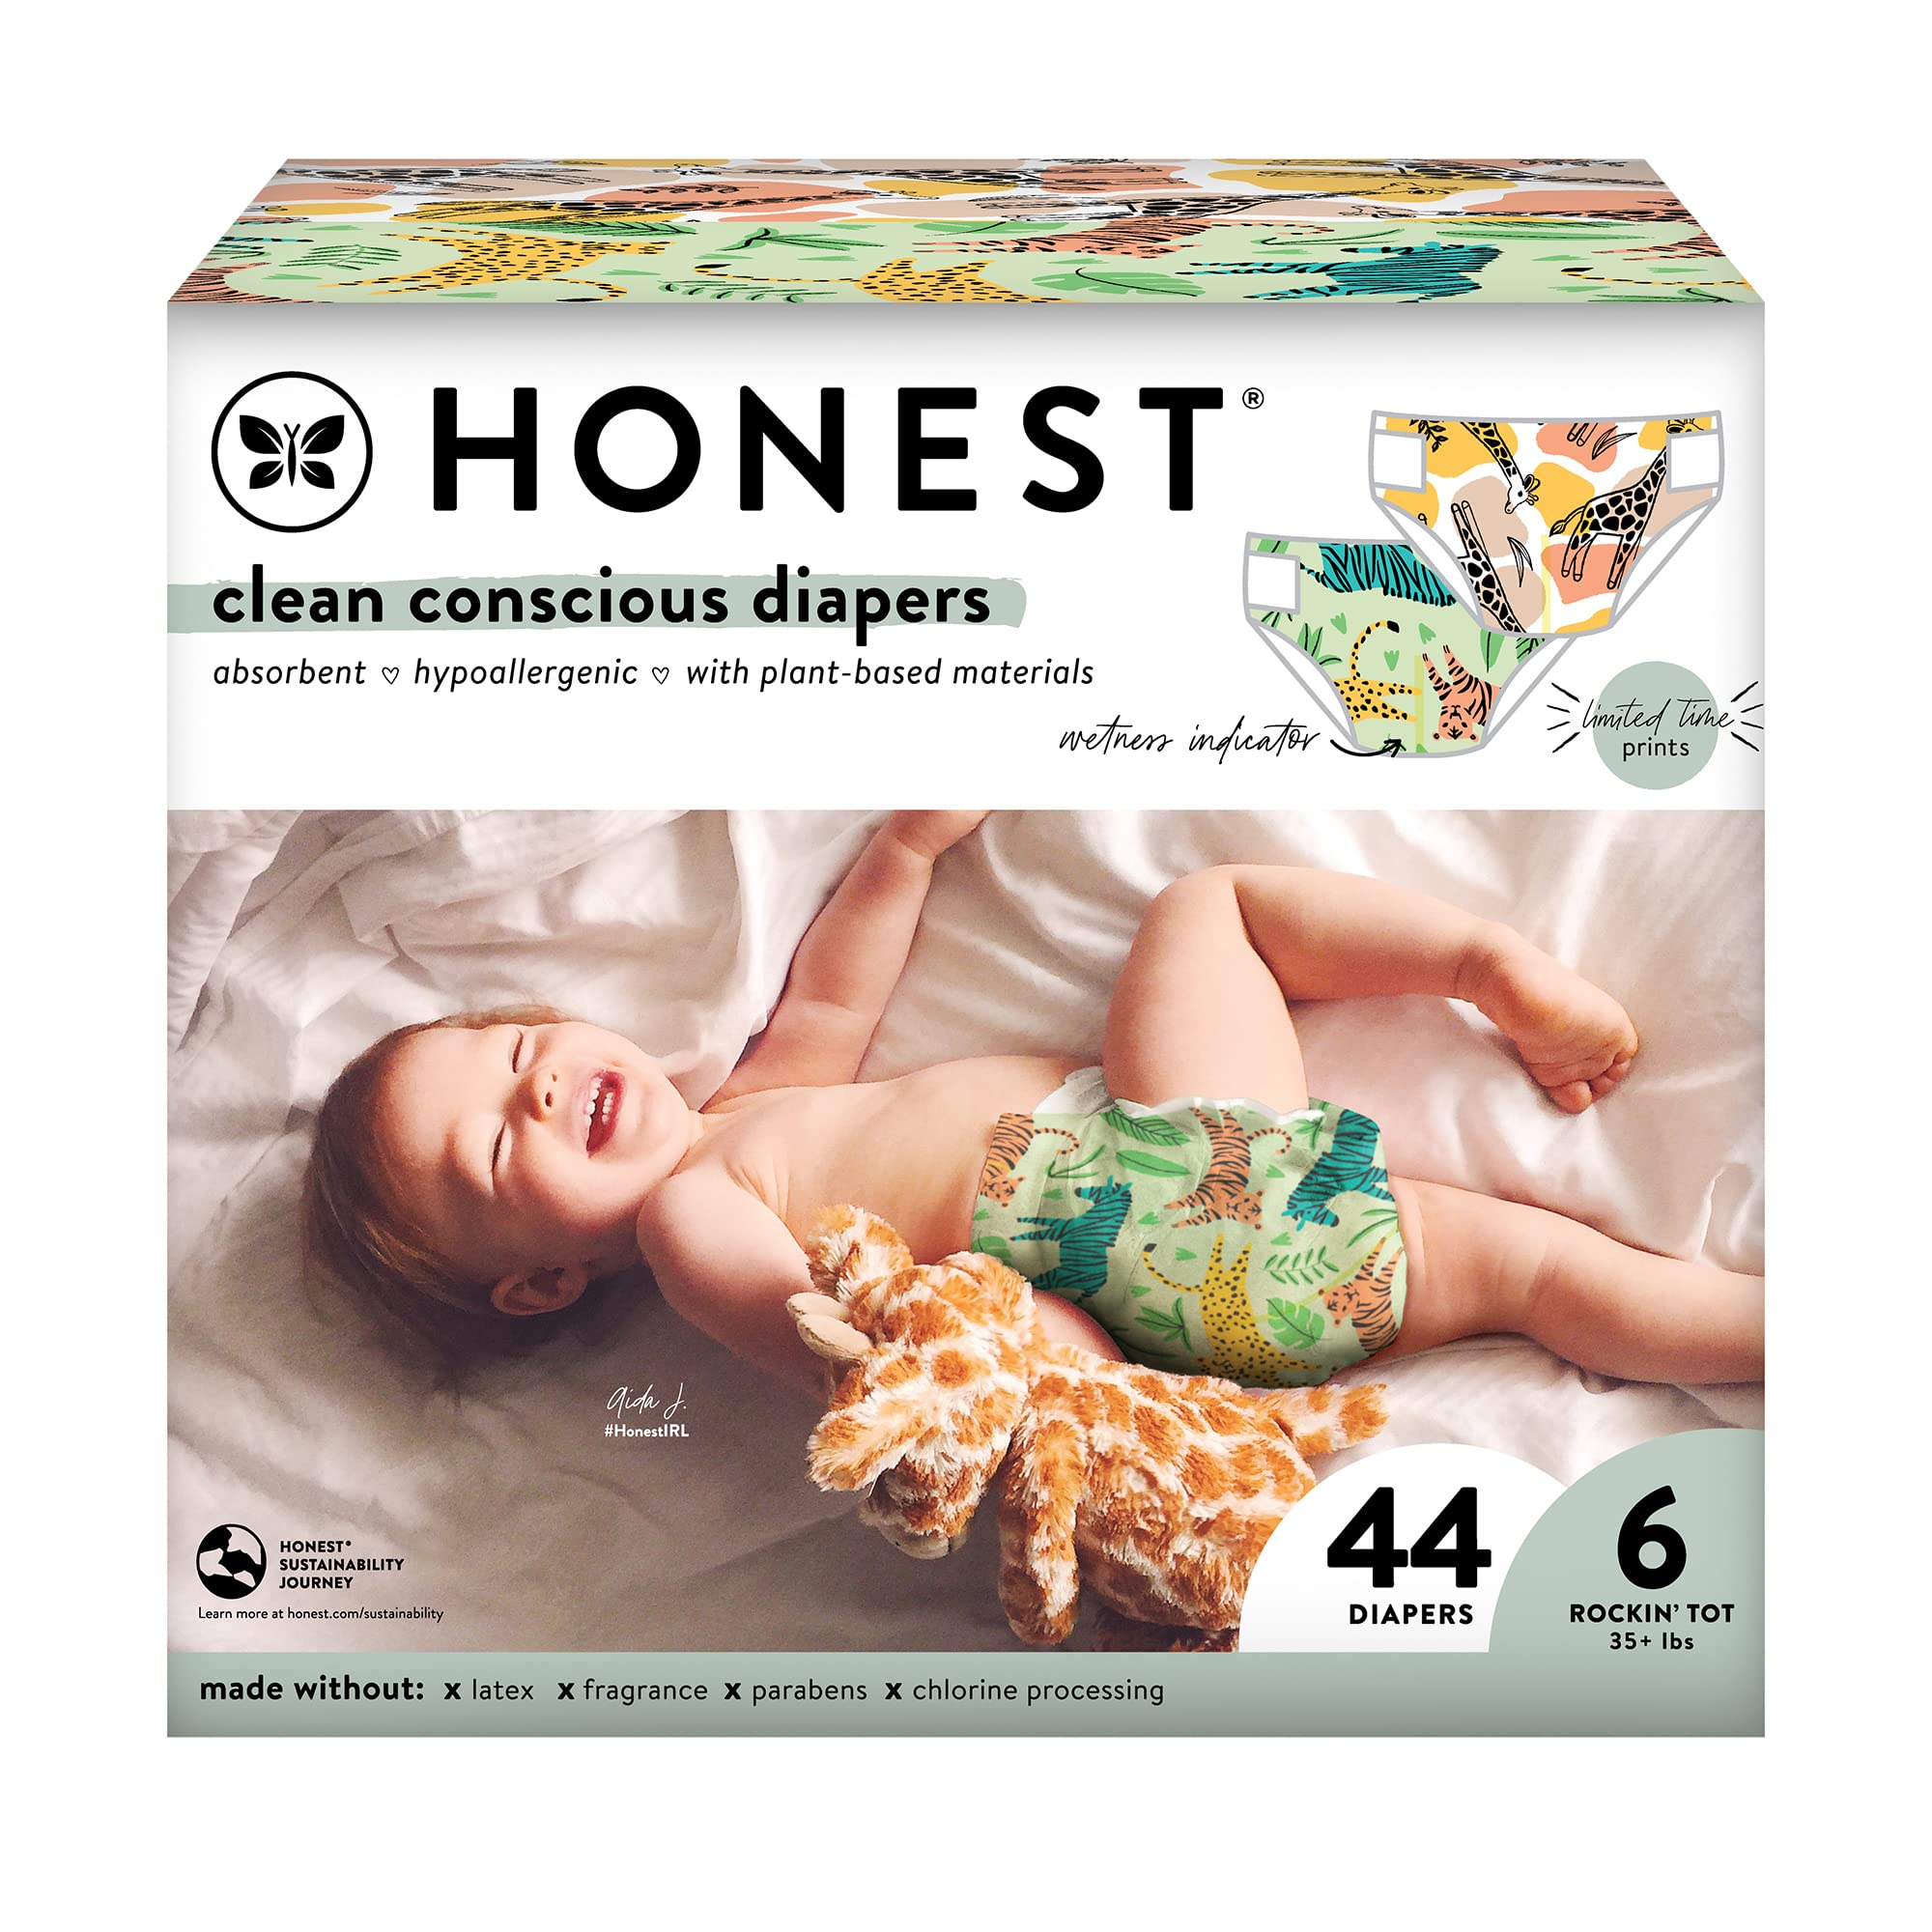 The Honest Company Clean Conscious Diapers | Plant-Based, Sustainable | Stripe Safari & Seeing Spots | Club Box, Size 6 (35+ lbs), 44 Count